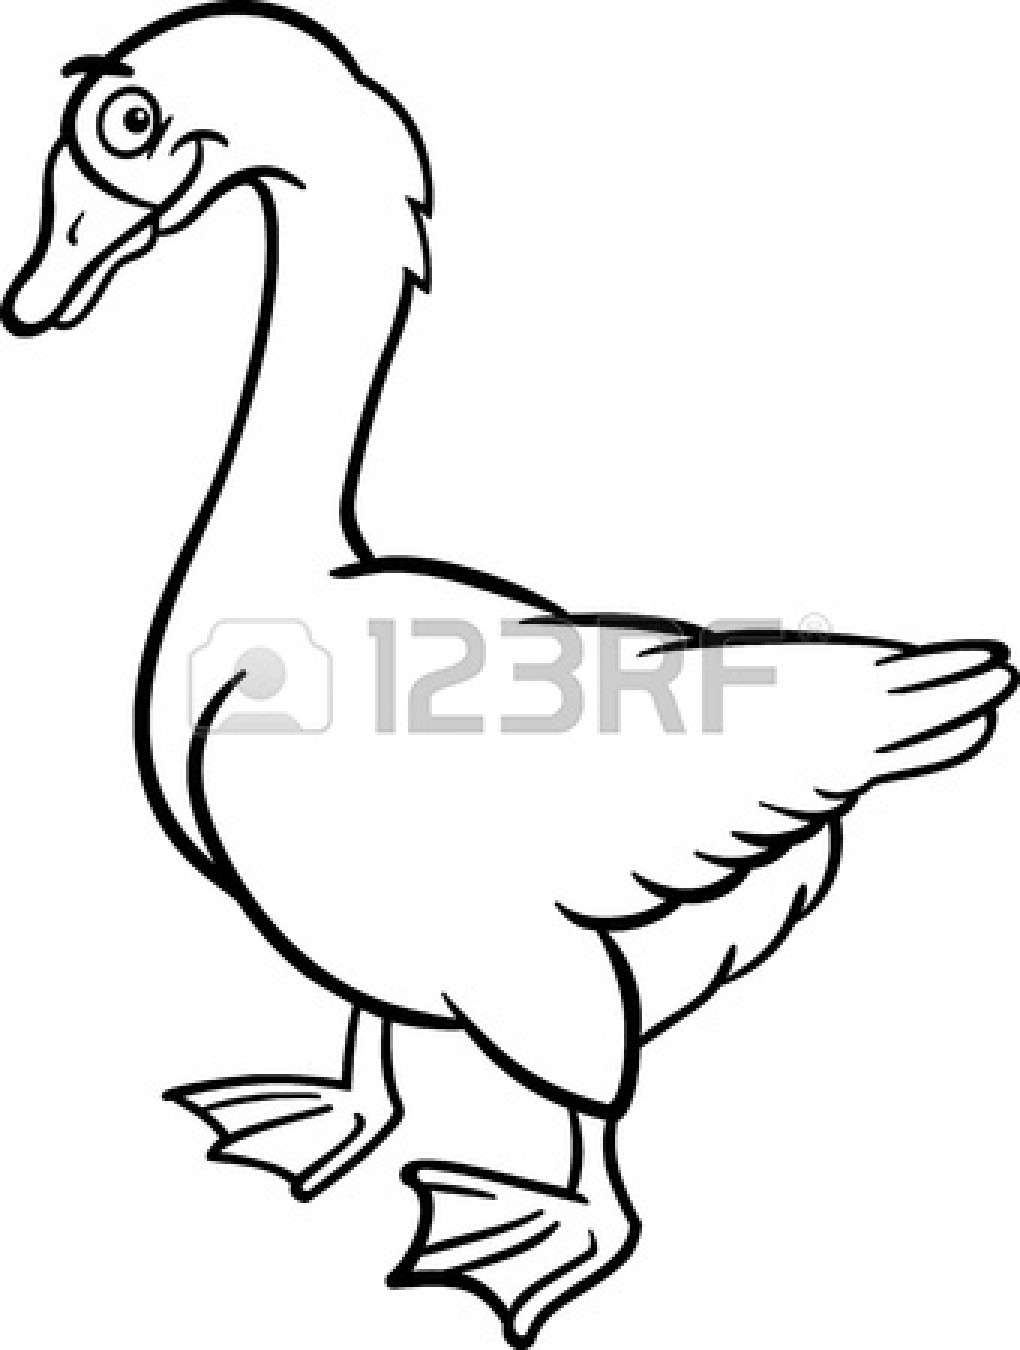 Clipart Bird Black And White   Clipart Panda   Free Clipart Images